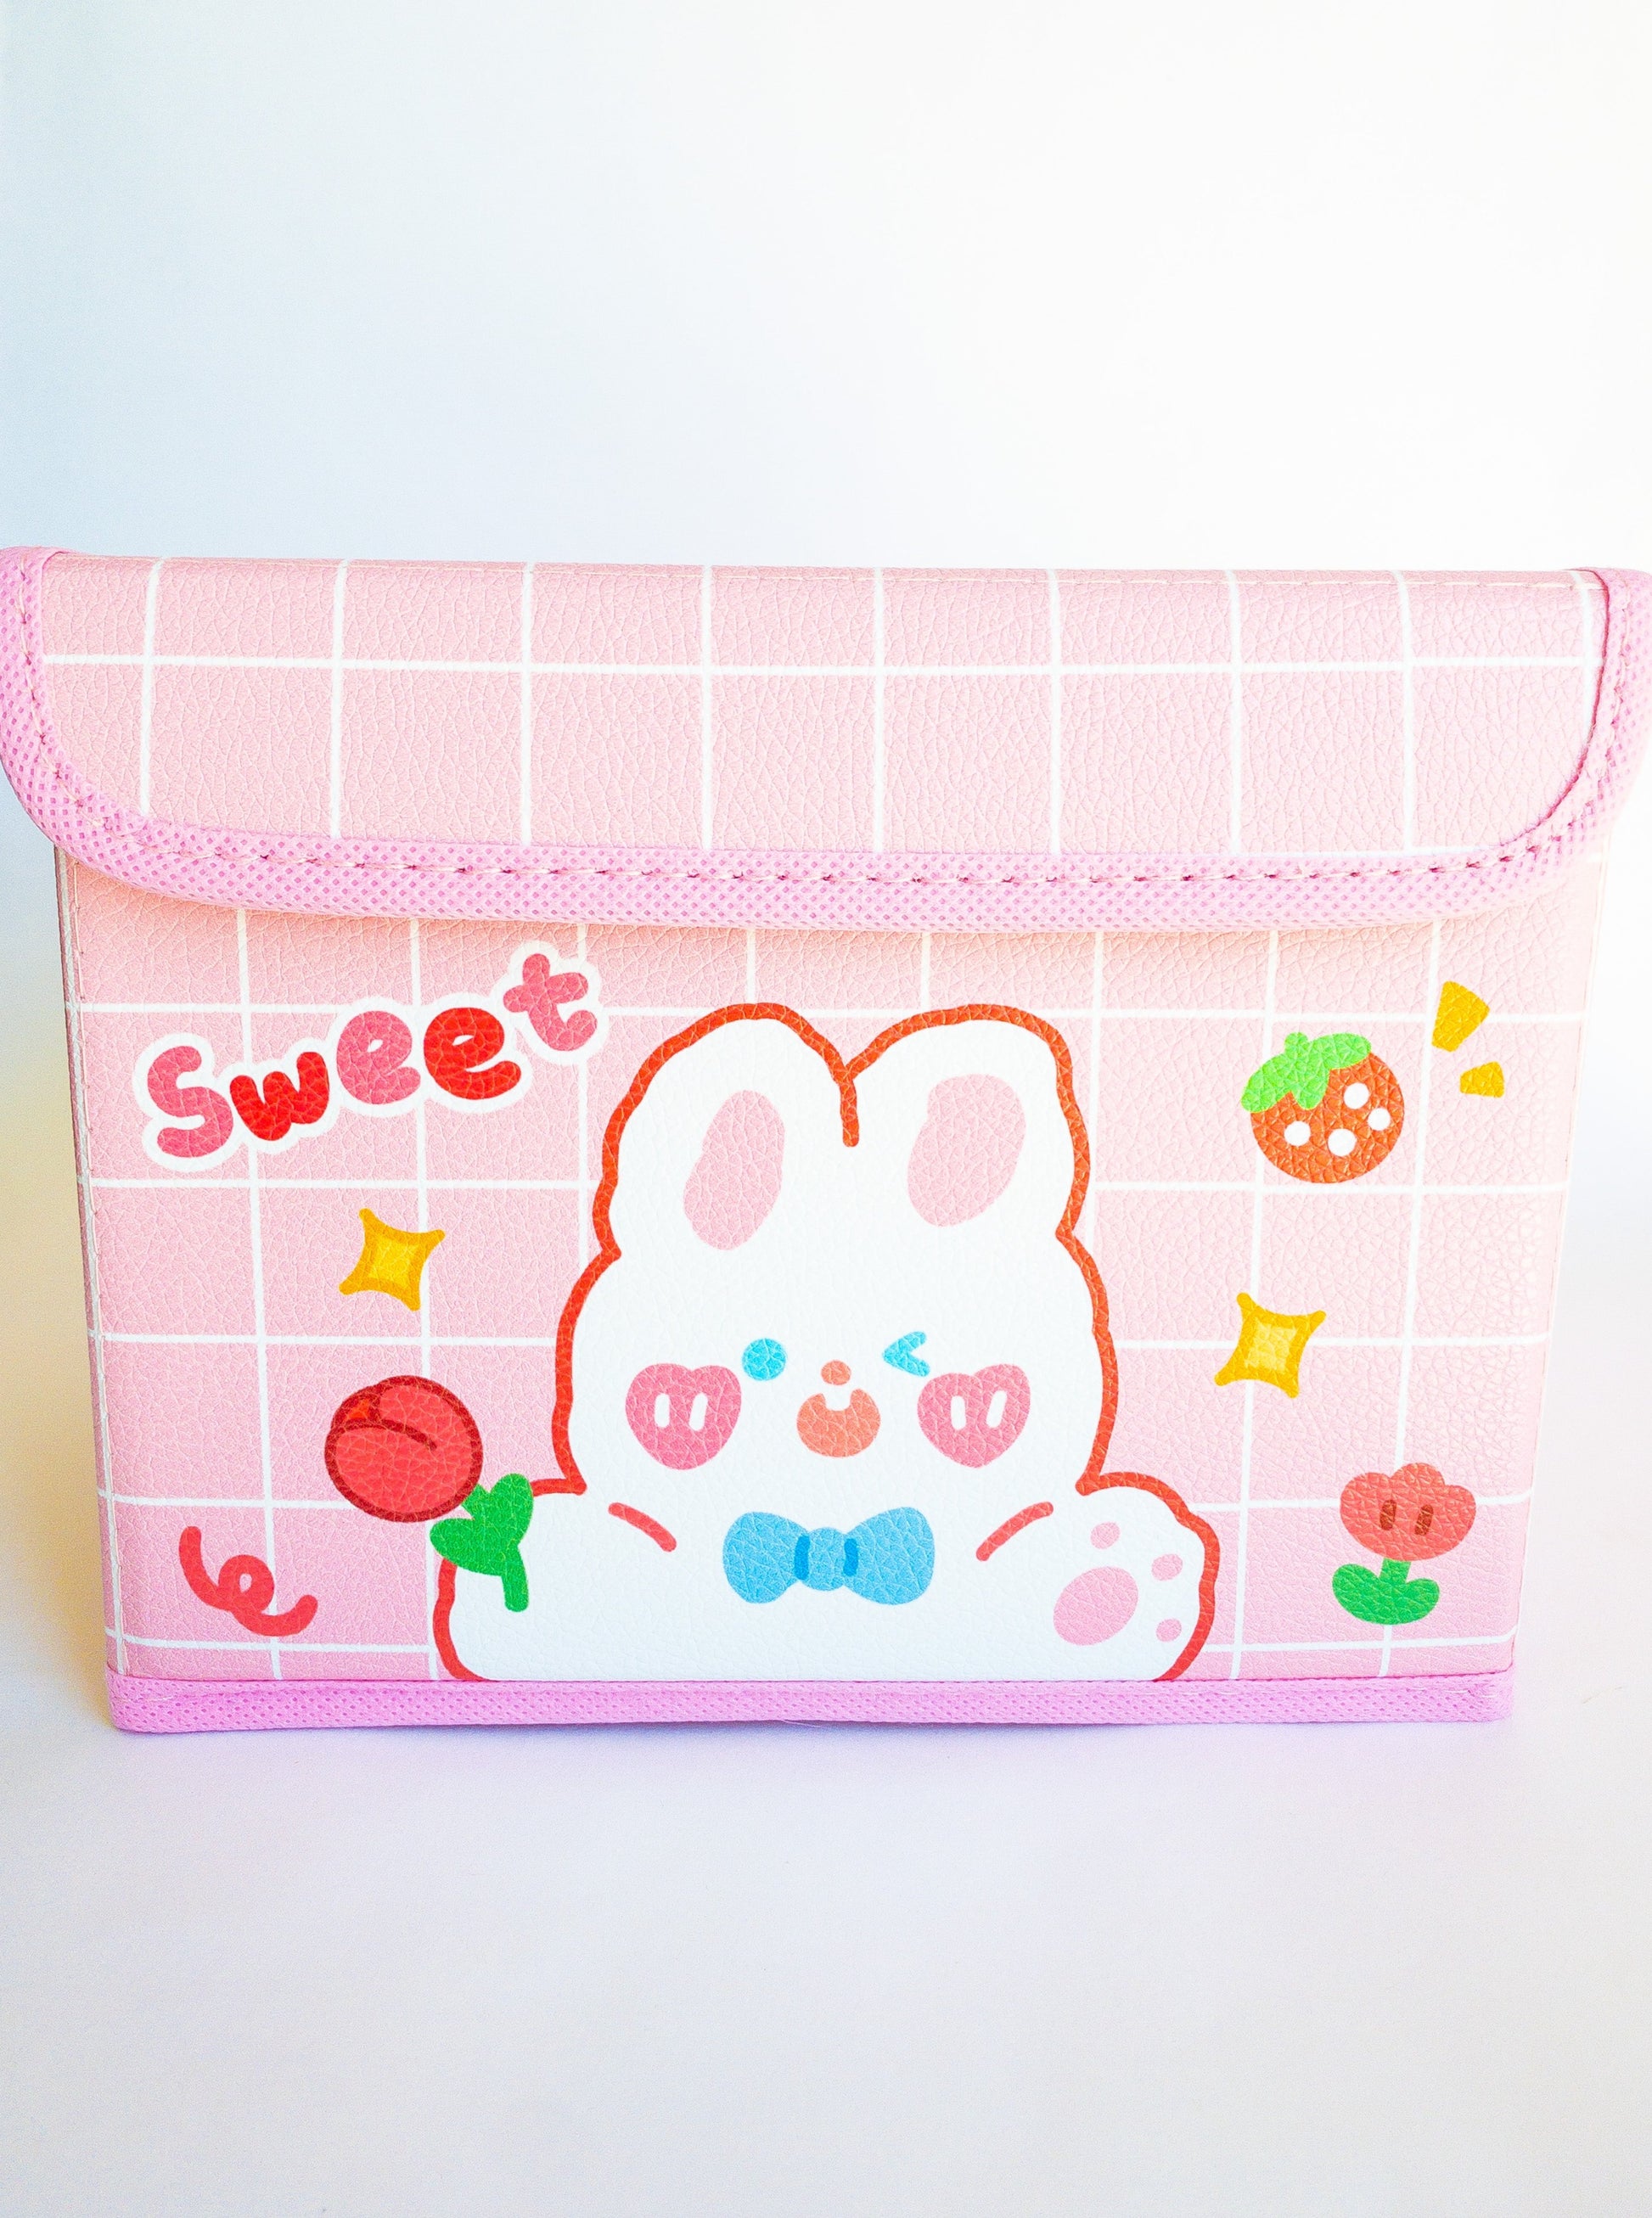 A multi-use, versatile storage box and the perfect place to throw all your Eggy Cakes hair clips in. The lid folds over and has a velcro close and it's large enough to hold pencils, markers, stickers, makeup, you name it